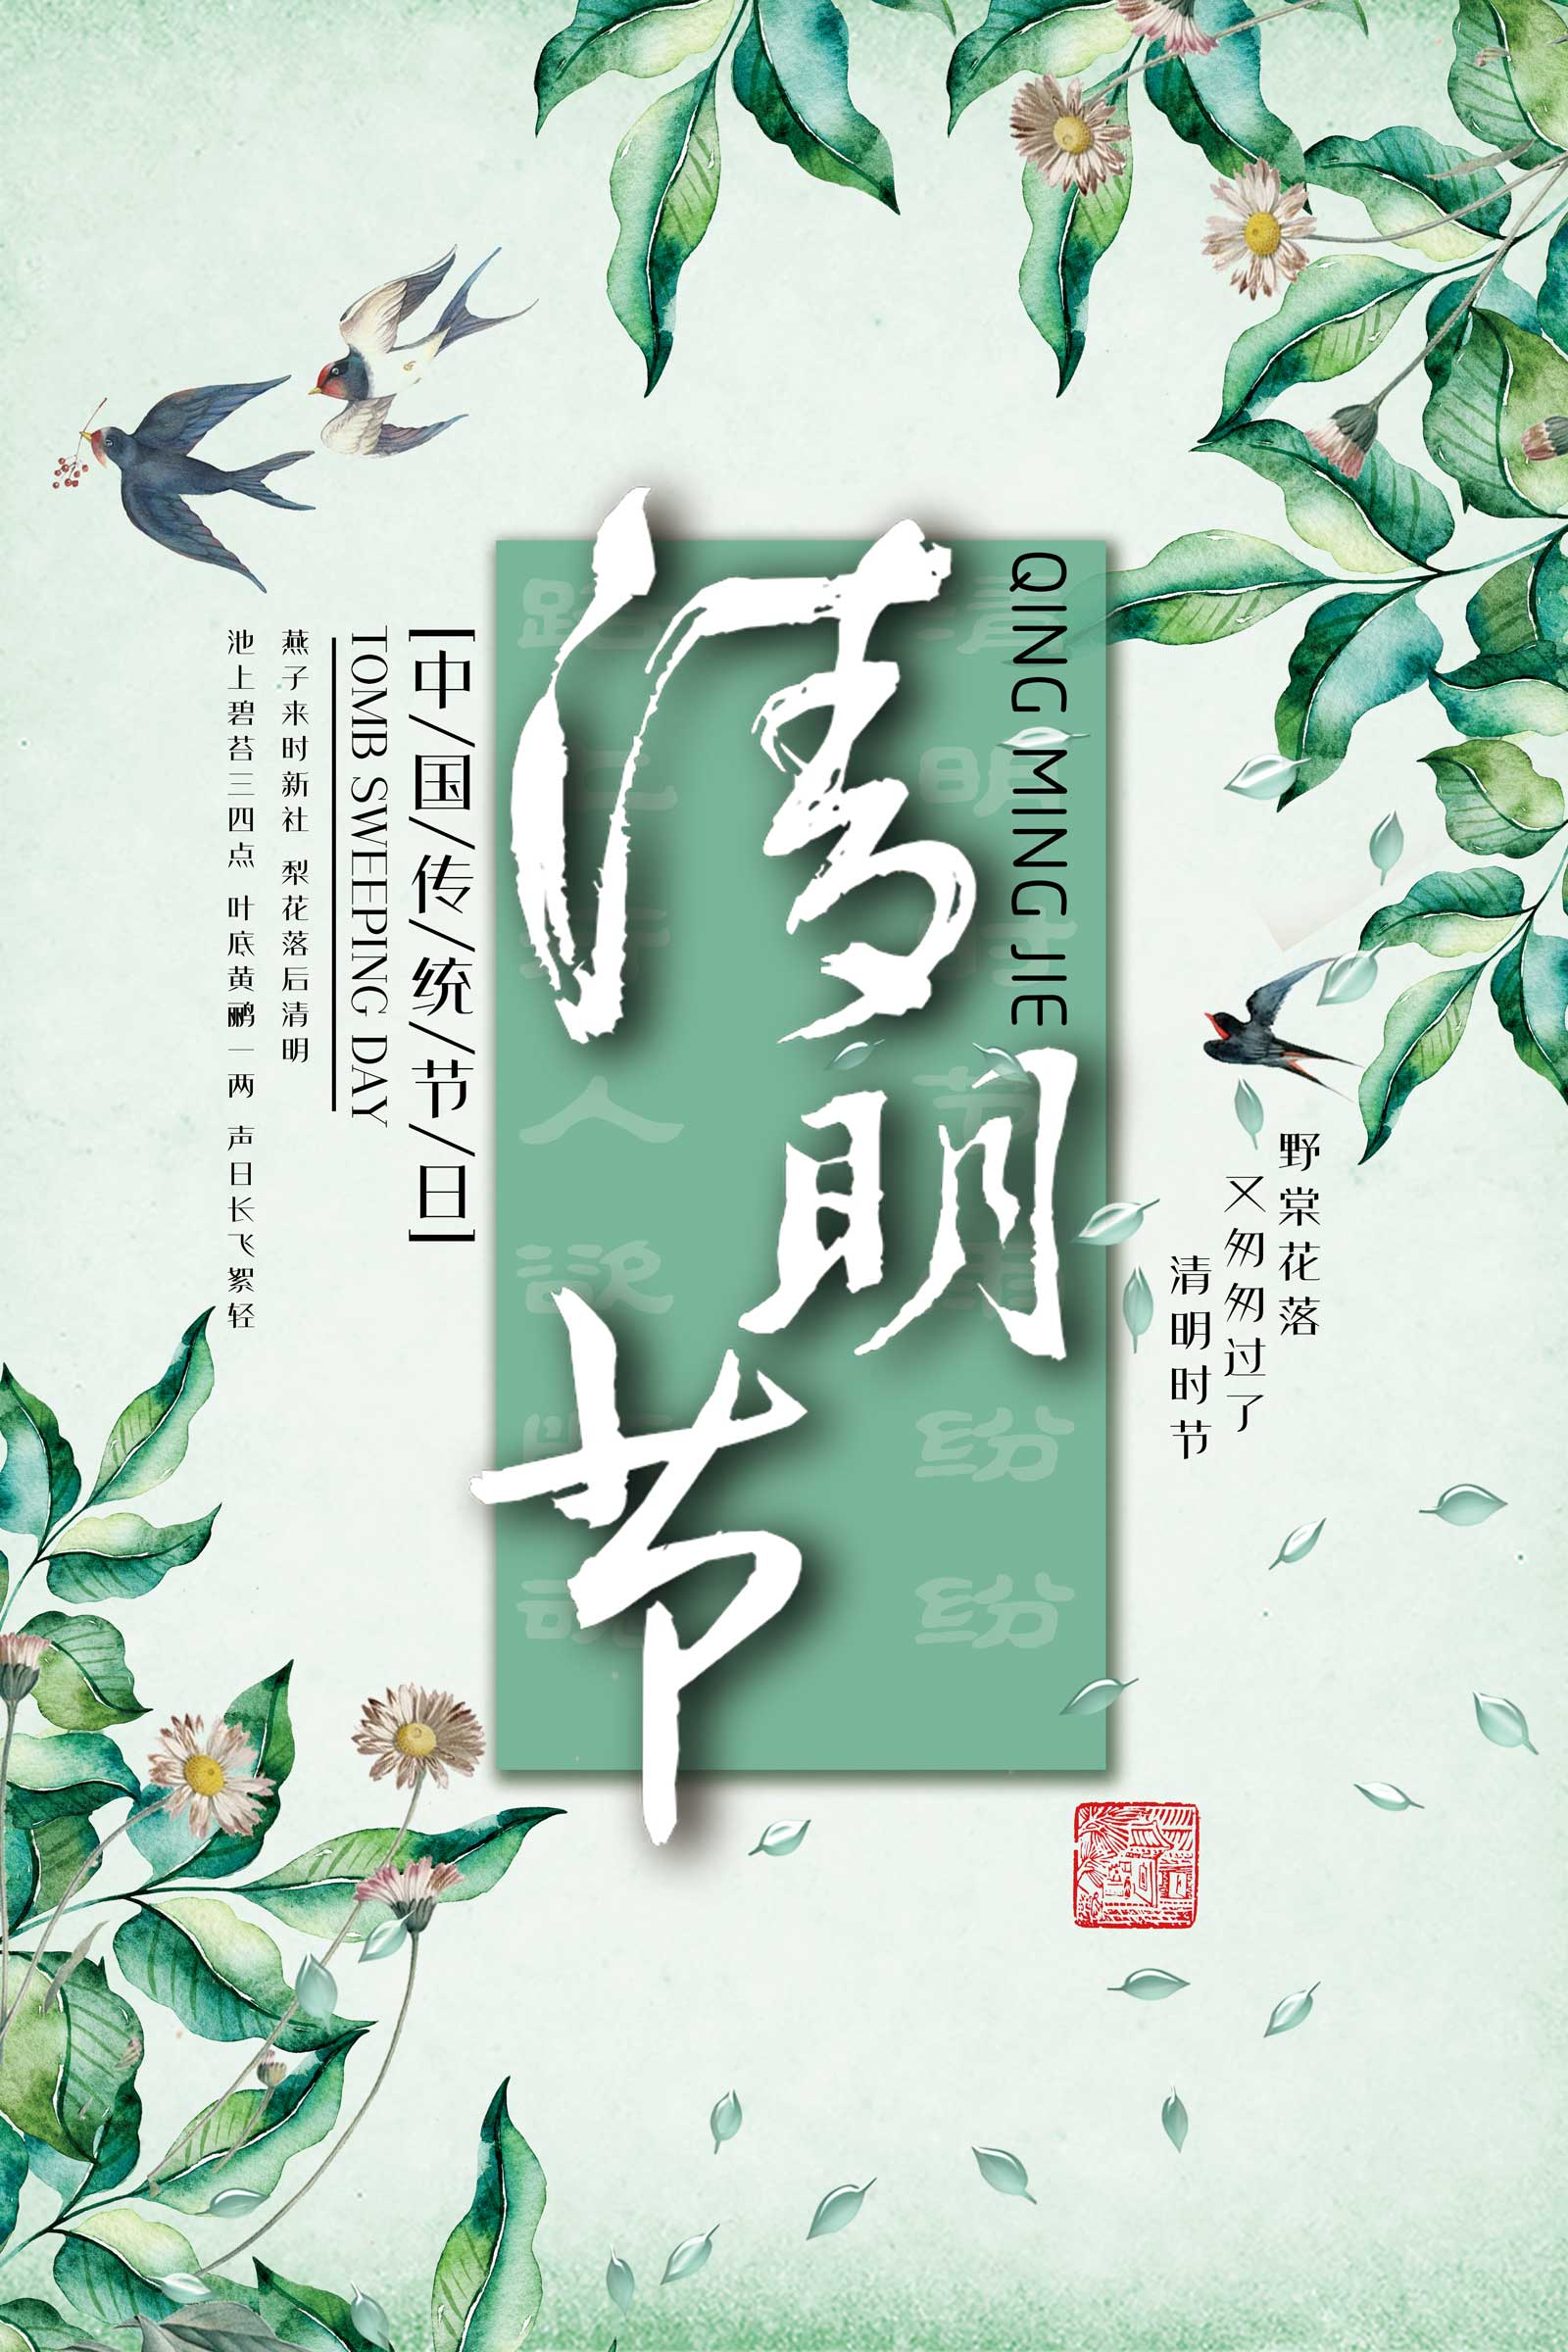 Chinese traditional ink painting style Qingming season poster PSD material File Free Download #.4